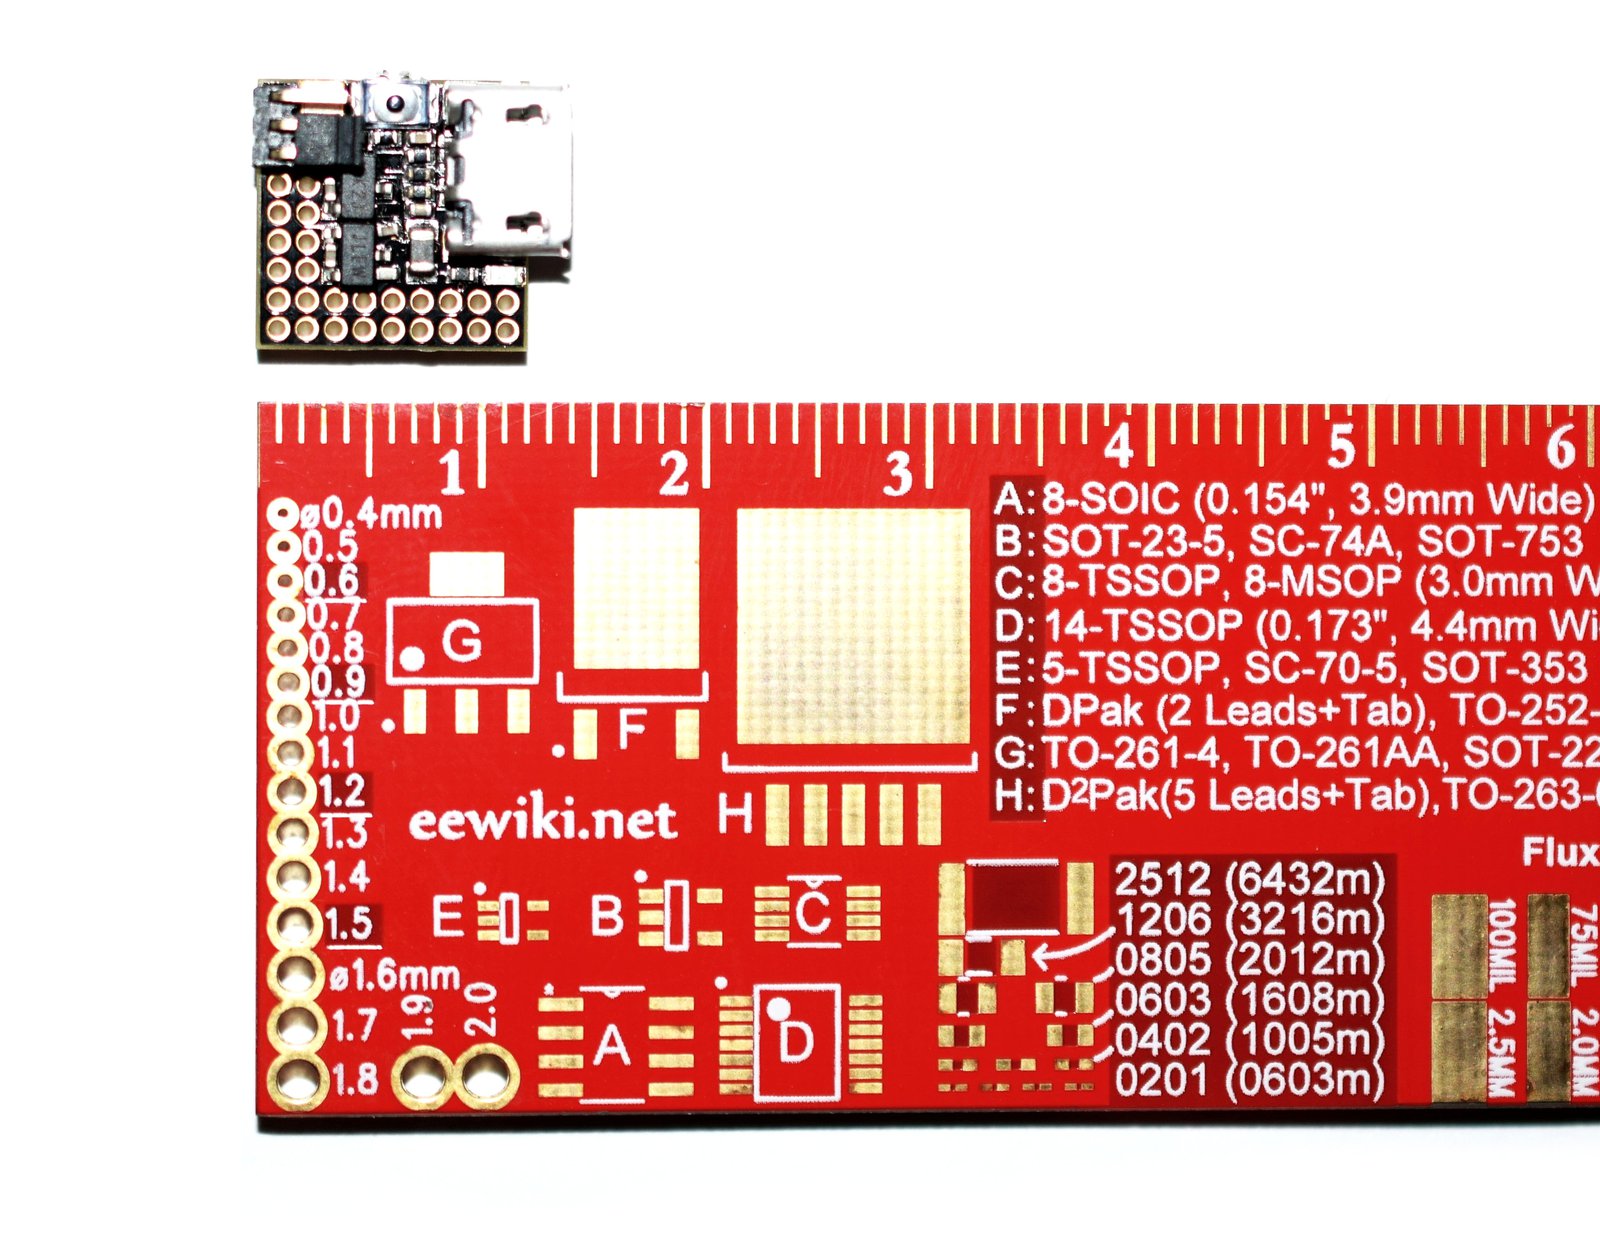 The µduino is the smallest Arduino compatible device ever made, at 12mm square!